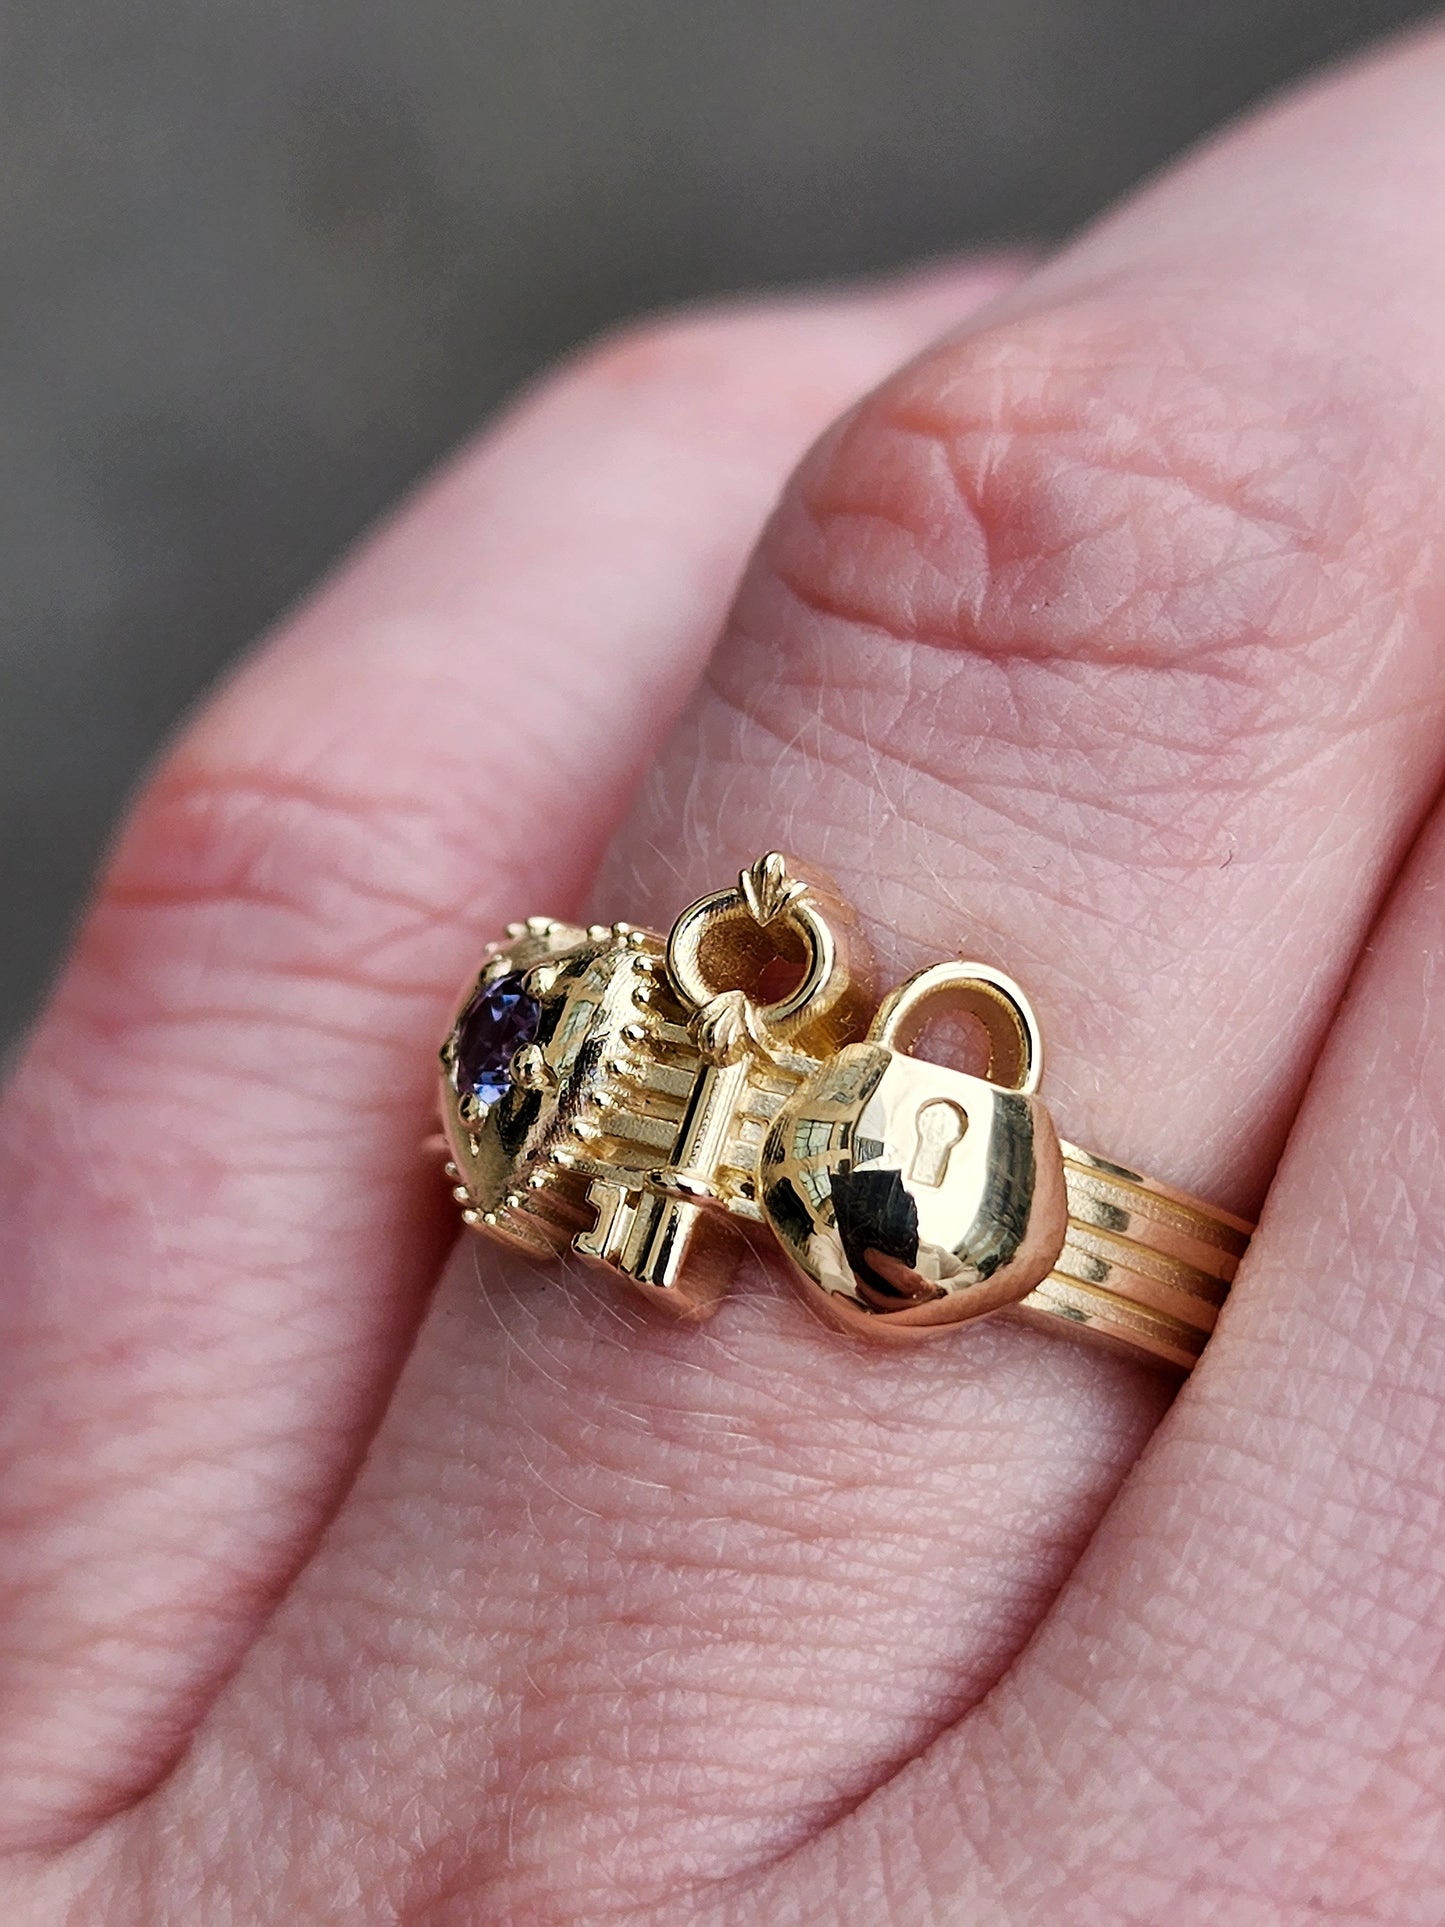 Antique Mine Cut Diamond Gold Lock and Key to My Heart Ring - Love Token Victorian Style Engagement Ring - 14k Yellow Gold, 14k Rose Gold or 14k Palladium White Gold